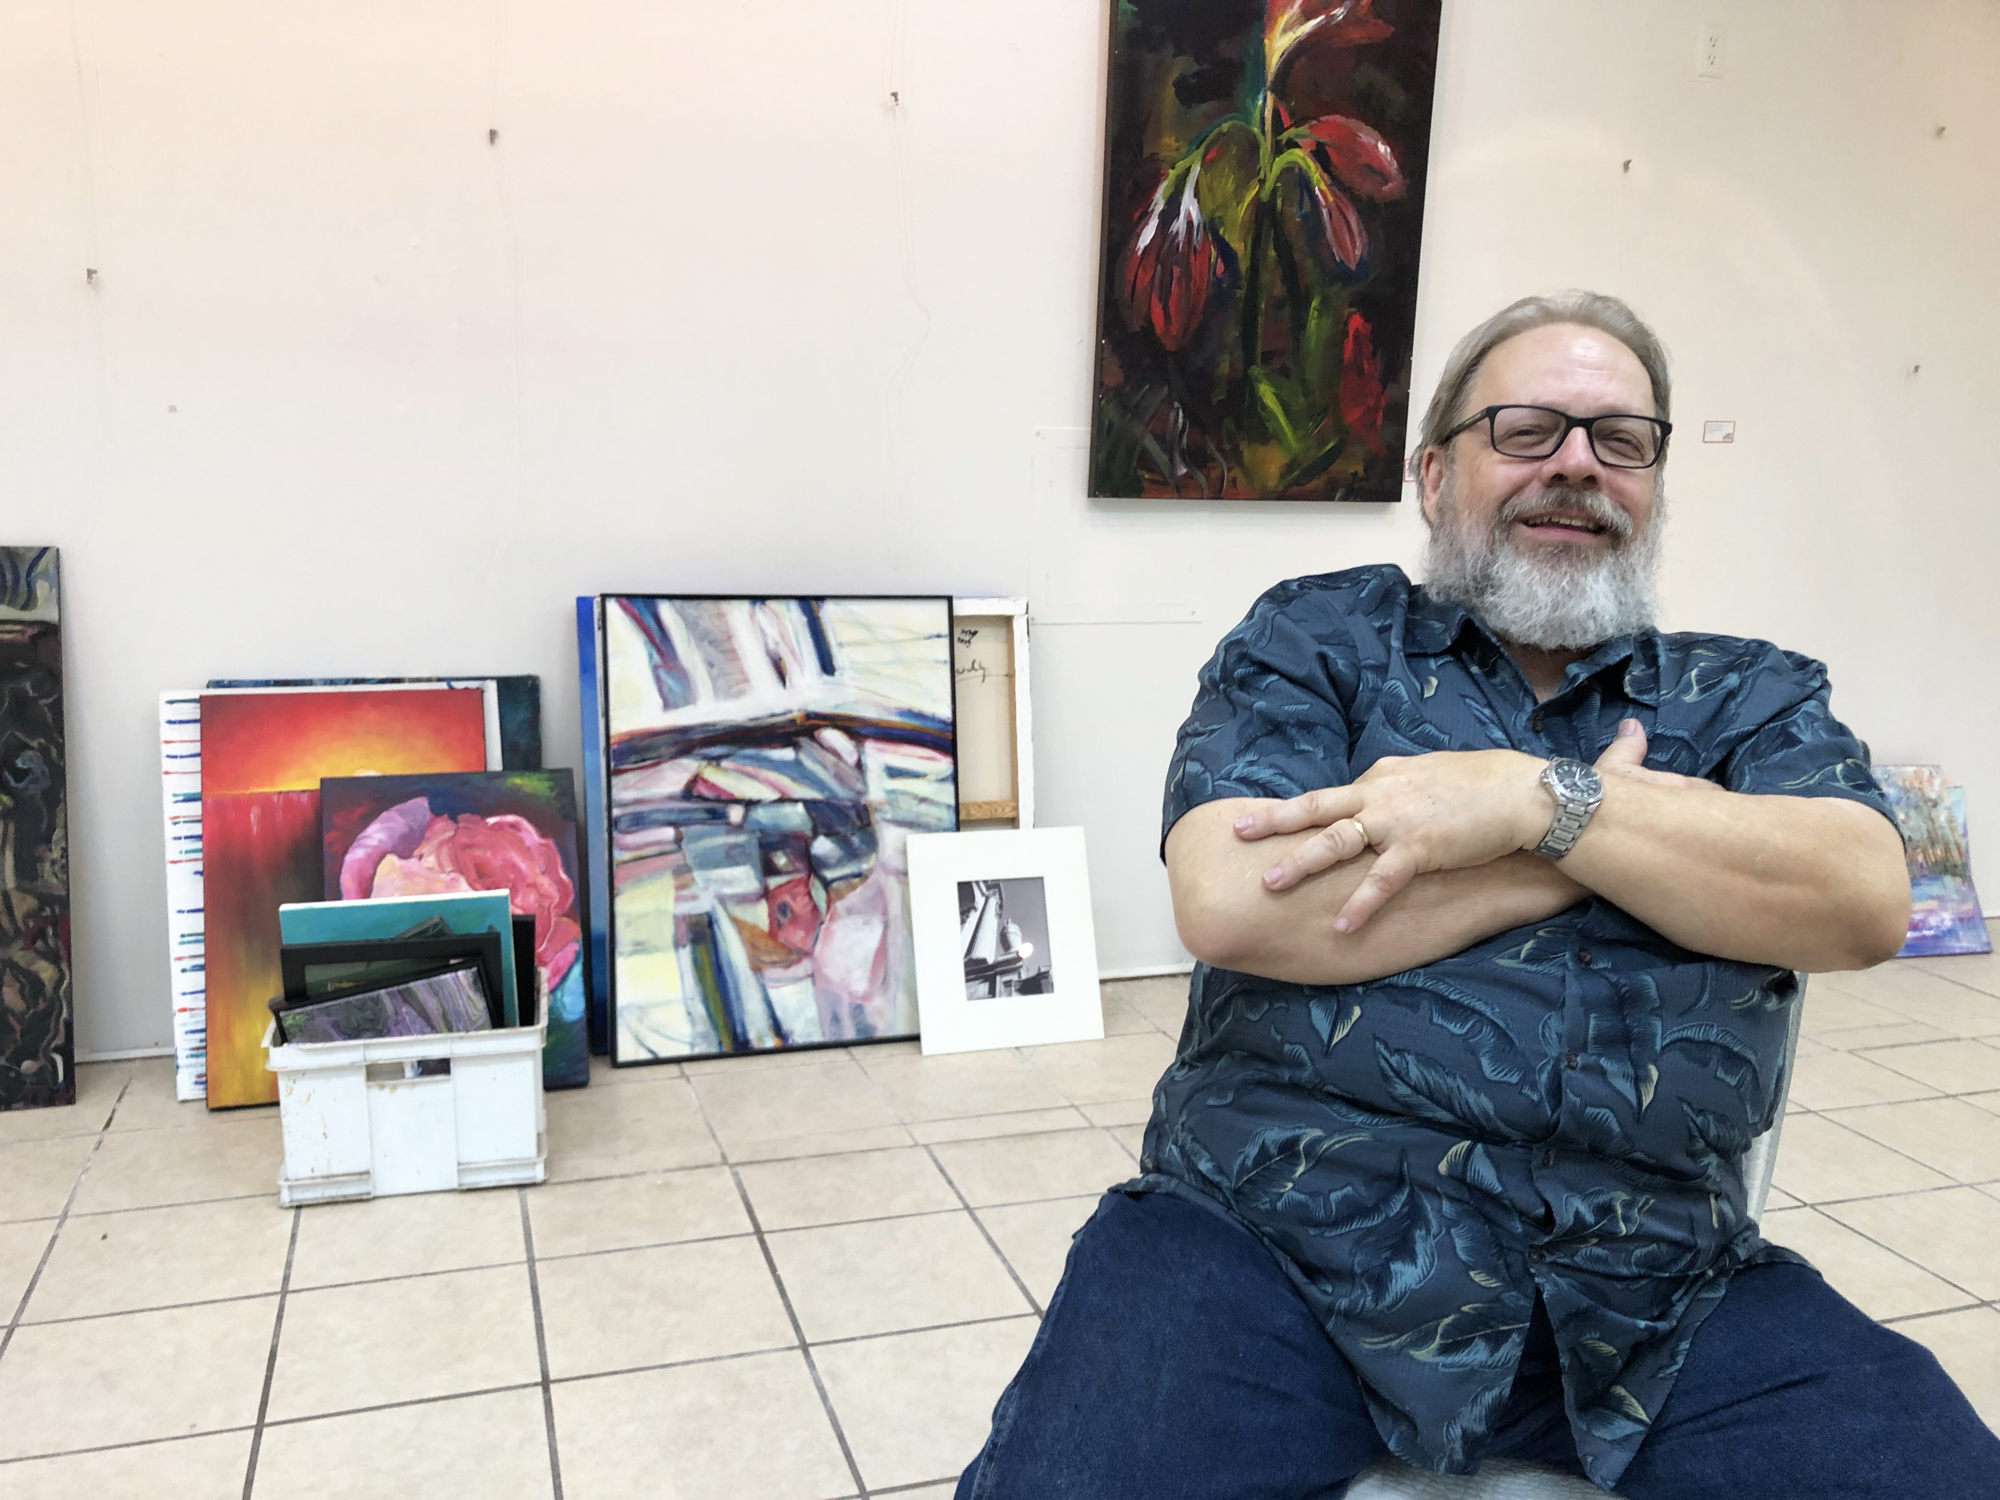 Ed Malesky is president of The Art Center Cooperative, a nonprofit member gallery and local studio space for artists that has operated in the Landing since 2015.